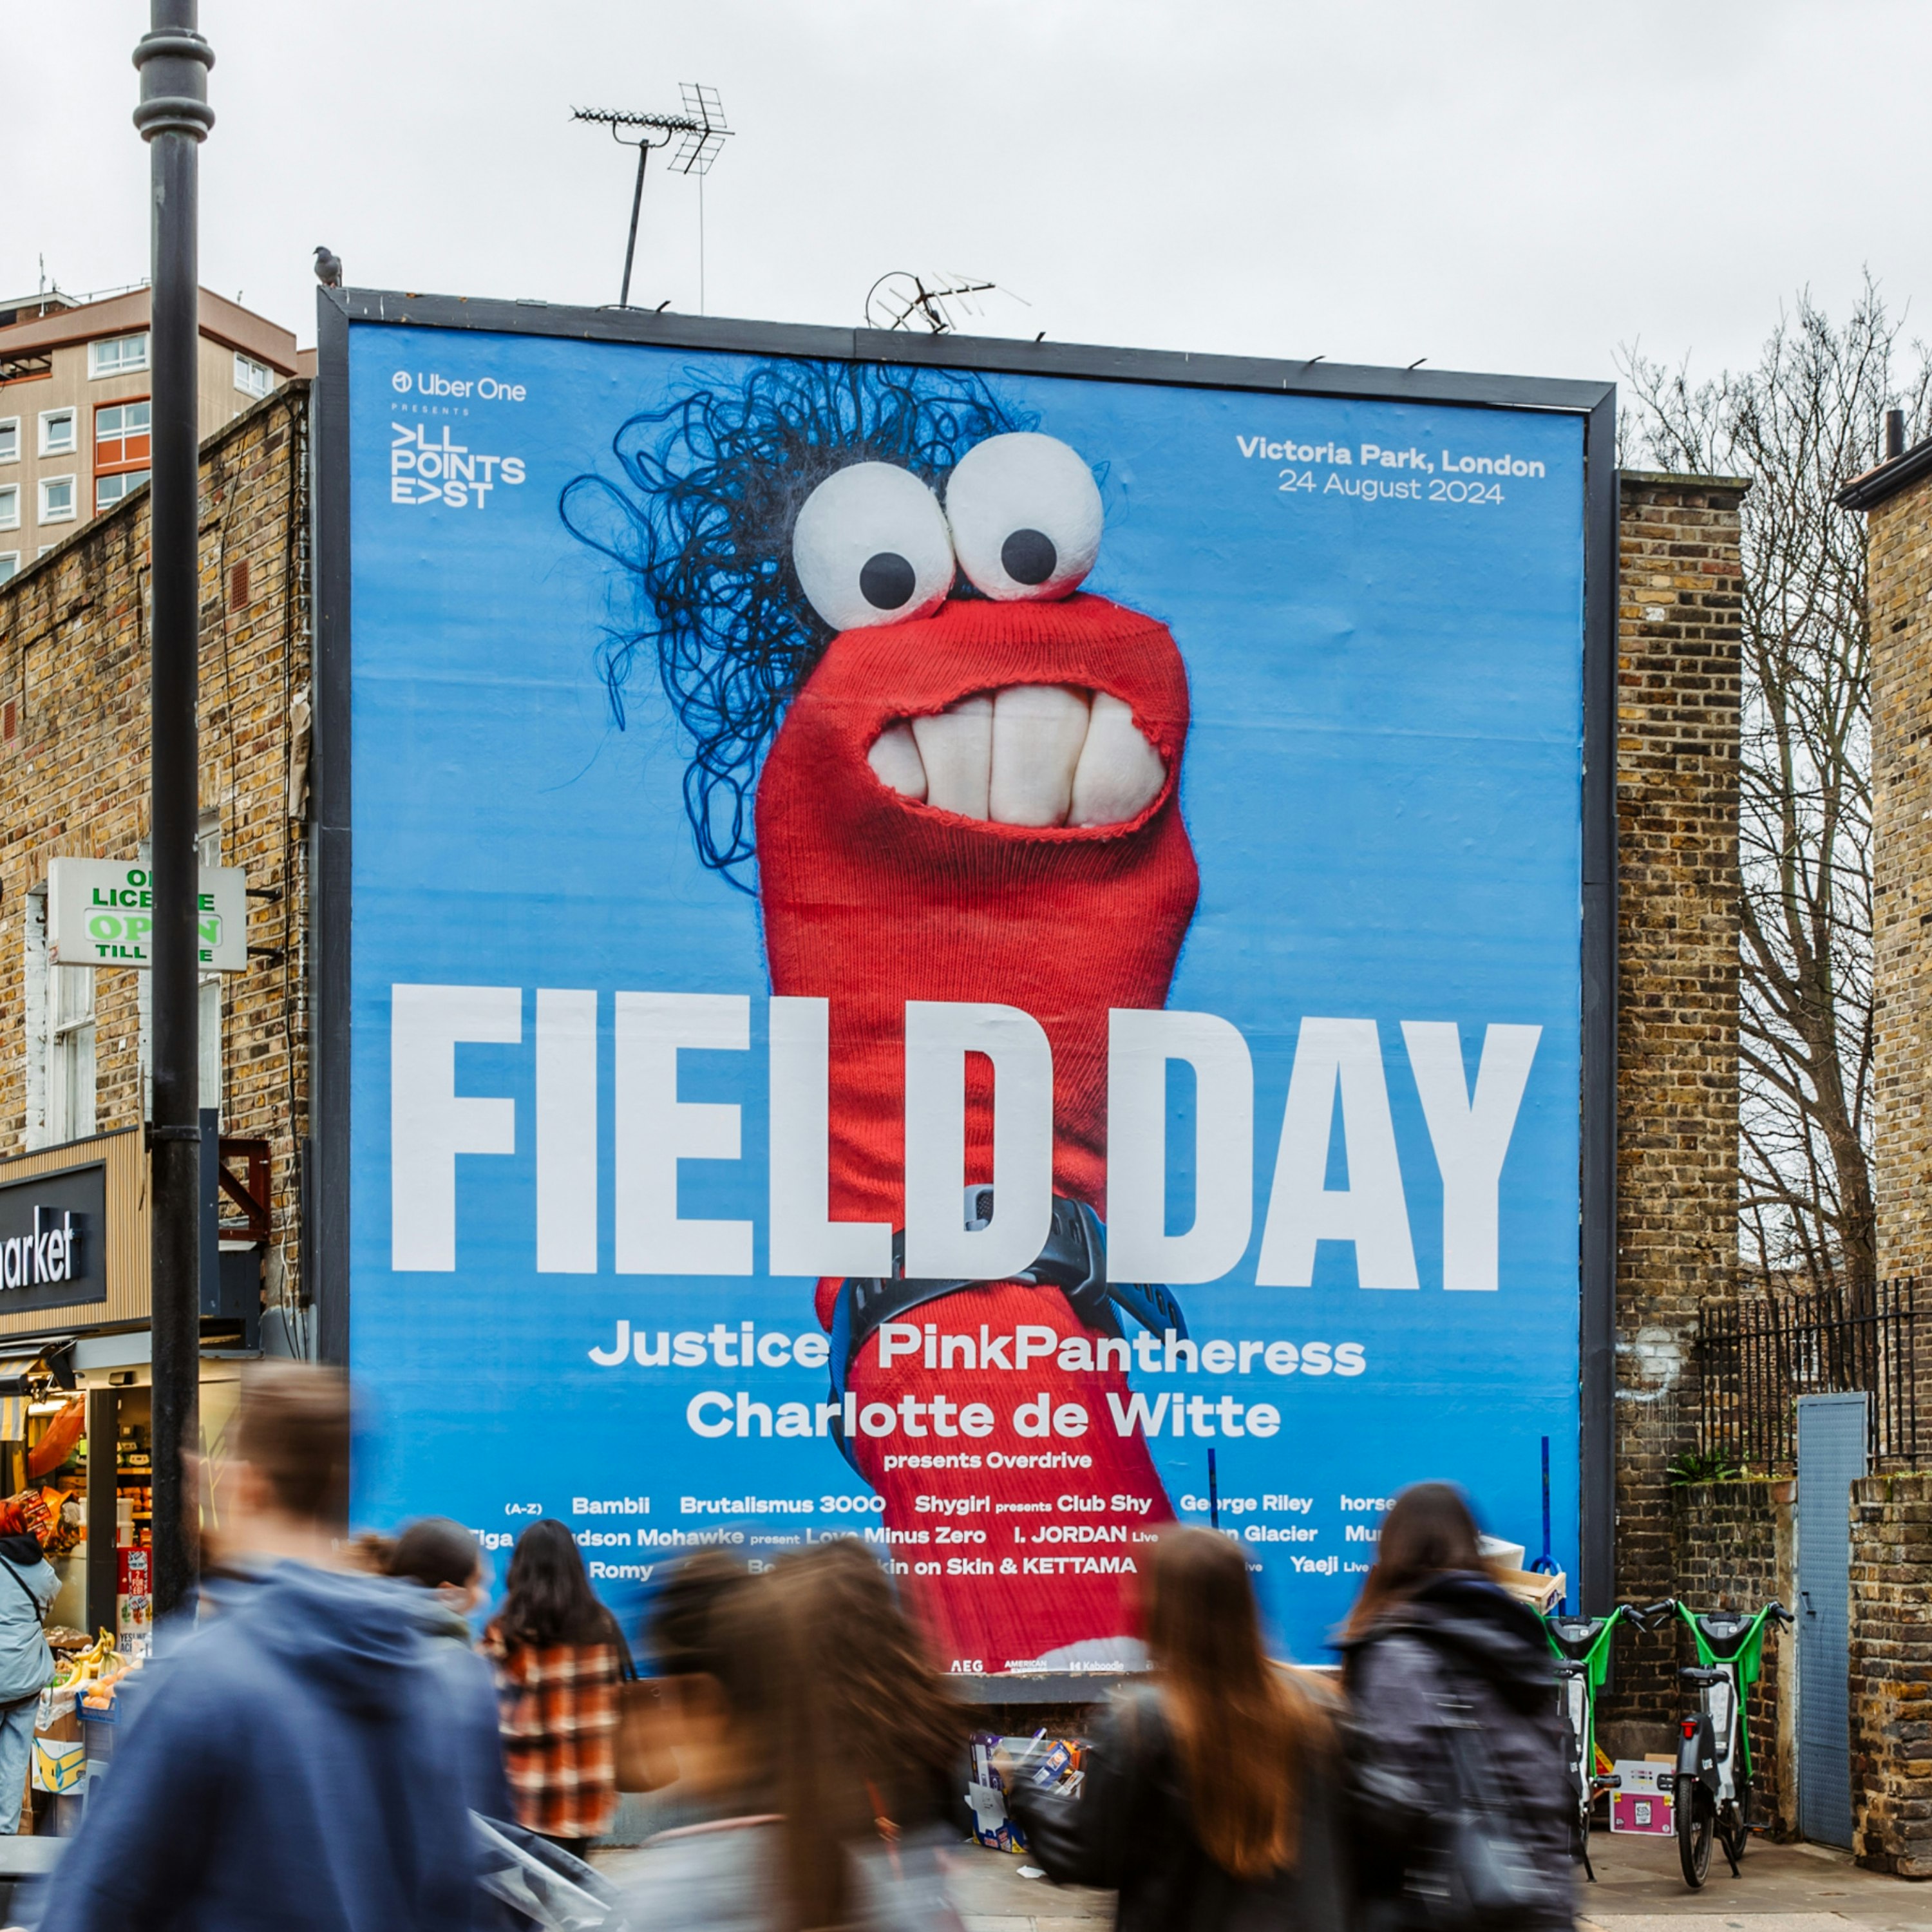 A large billboard advertising Field Day, featuring a red puppet on a blue background.